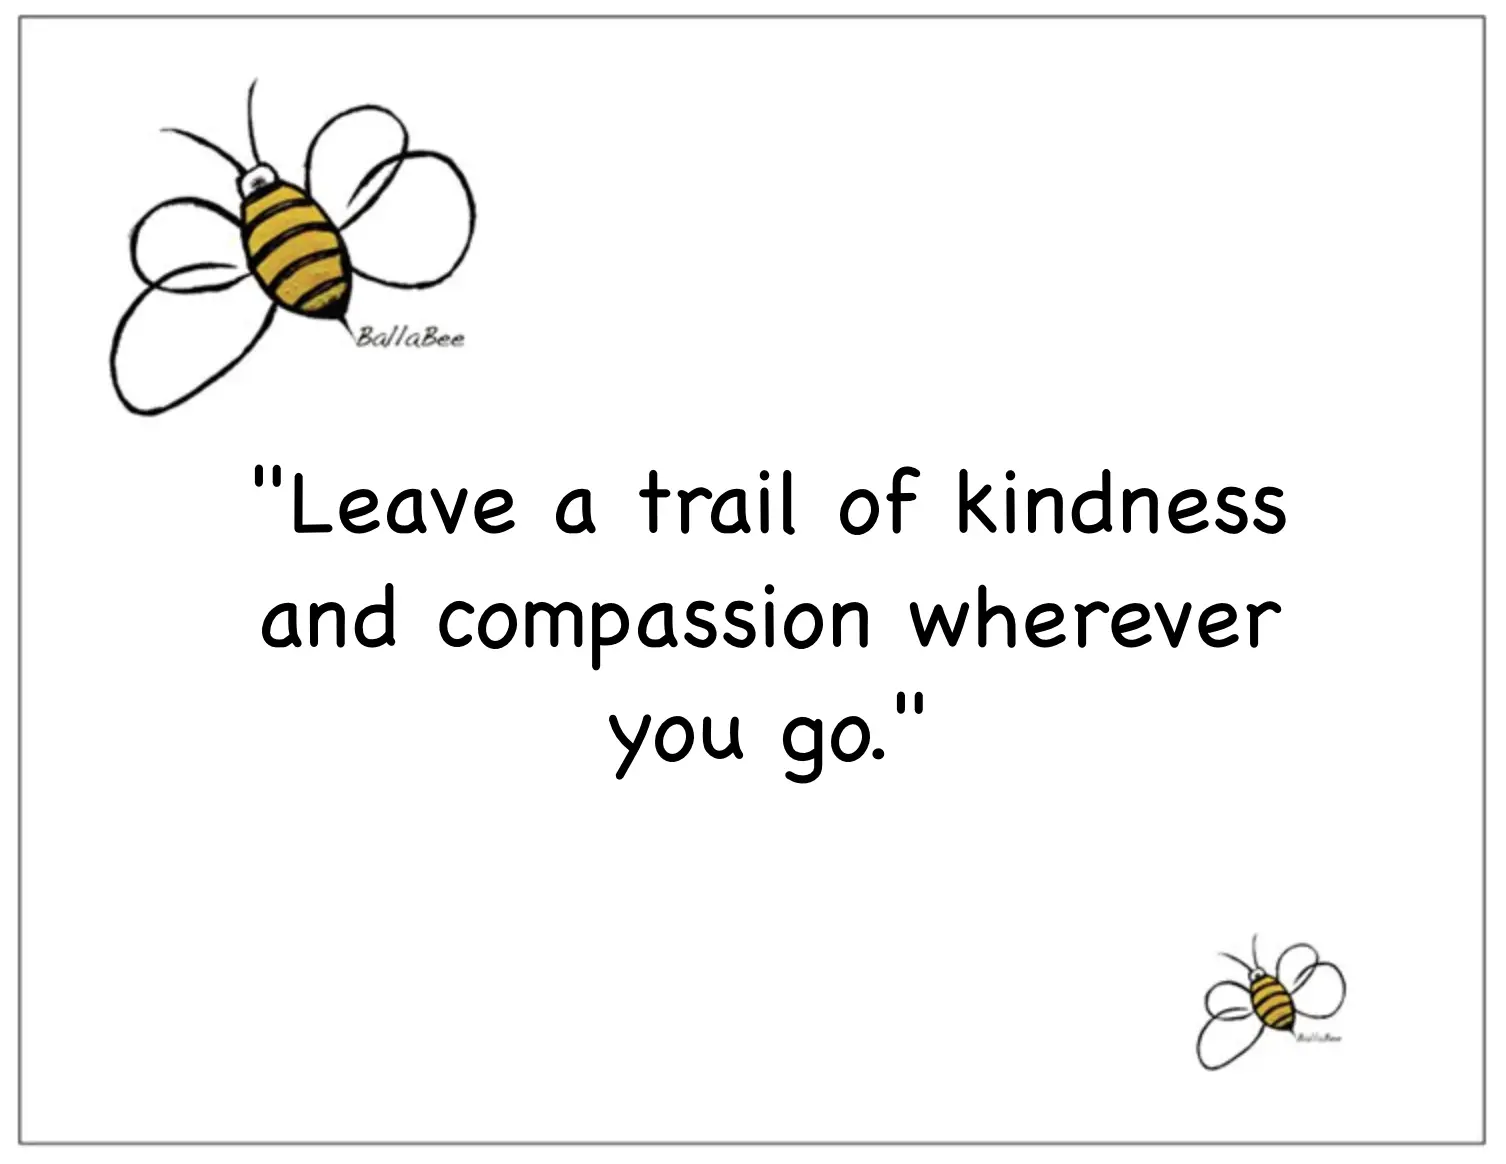 Leave a trail of kindness and compassion wherever you go